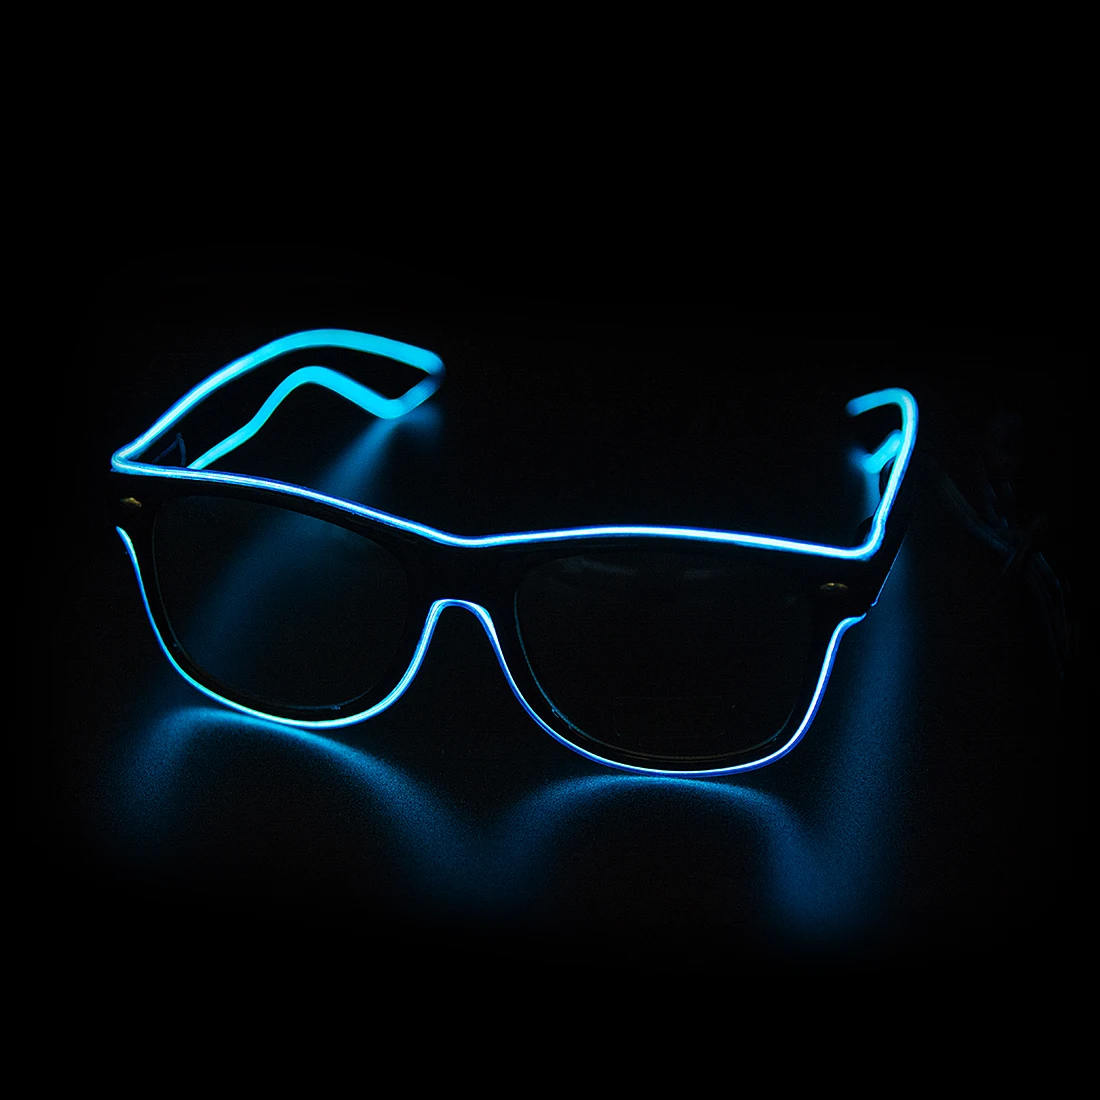 Raves Gemini_mall® Neon El Wire LED Light Up Funny Amazing Cool Glasses Eyeglasses Sunglasses Eyewear for Christmas Halloween Wild Party,Dance Ball,Crazy Parties